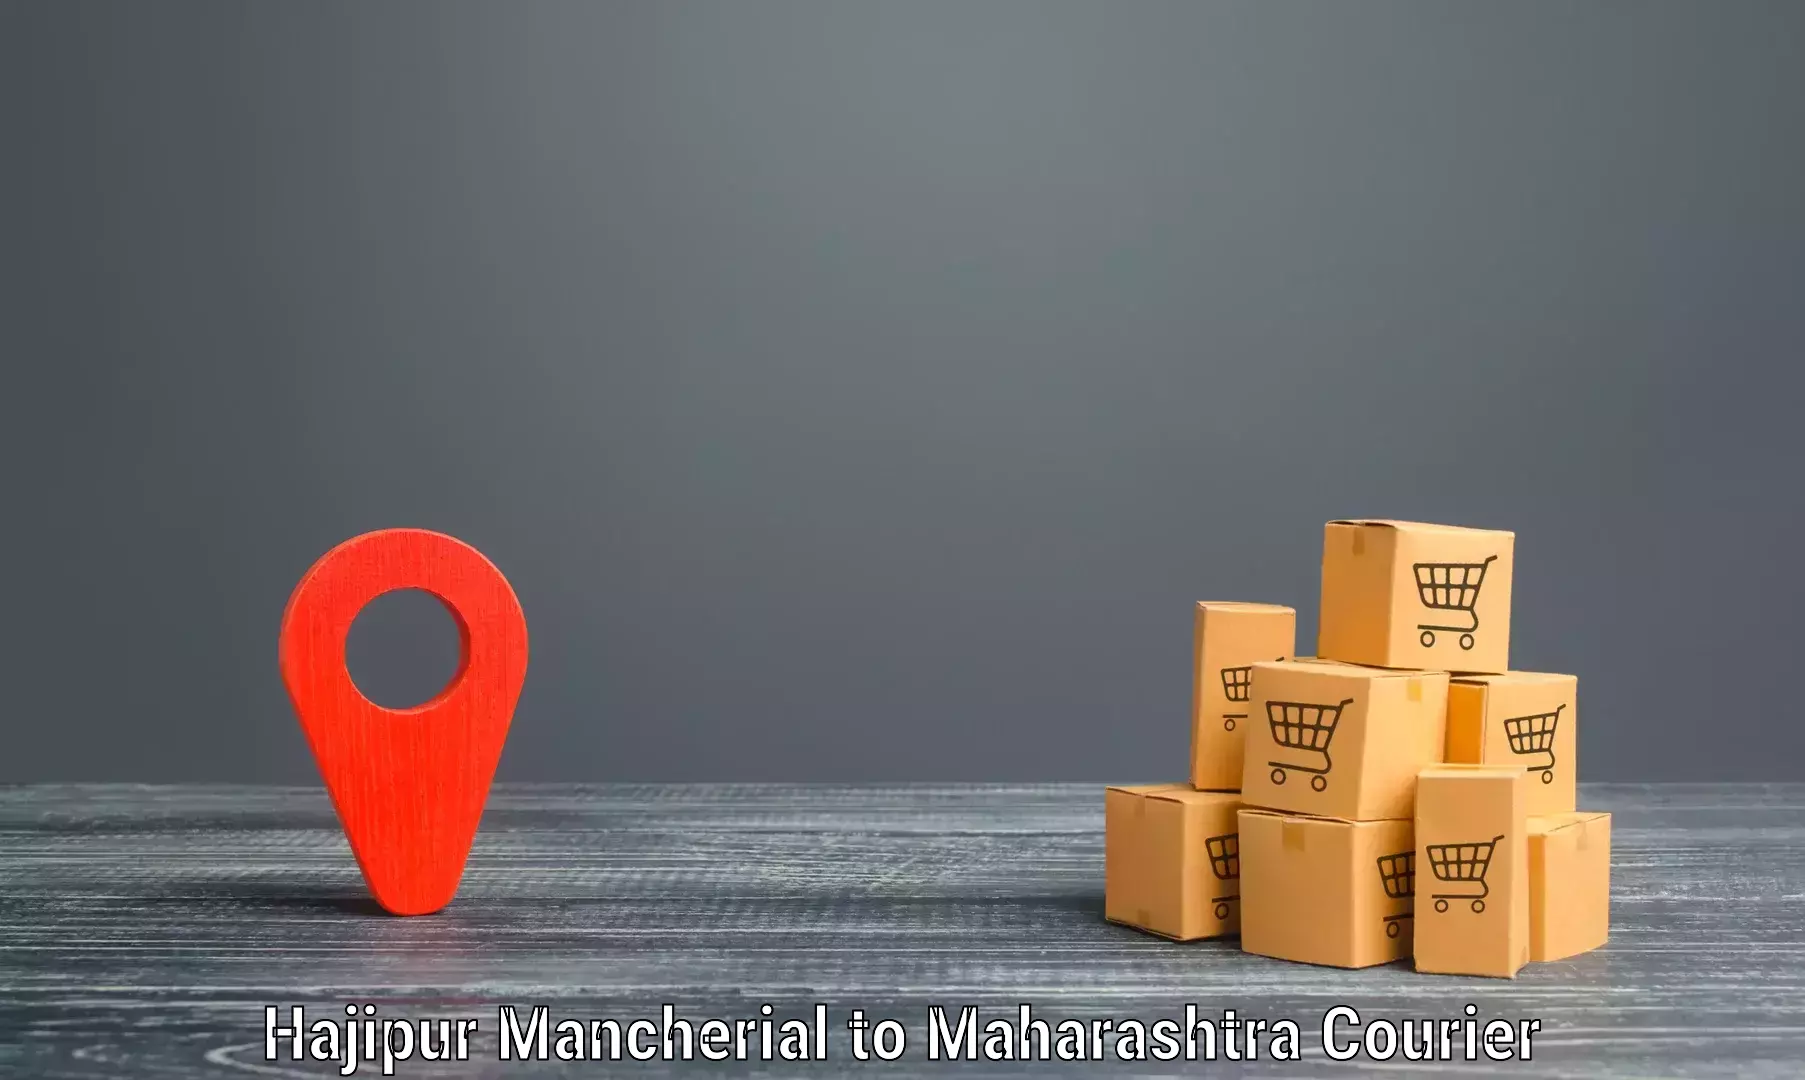 Rural area delivery in Hajipur Mancherial to Chandrapur